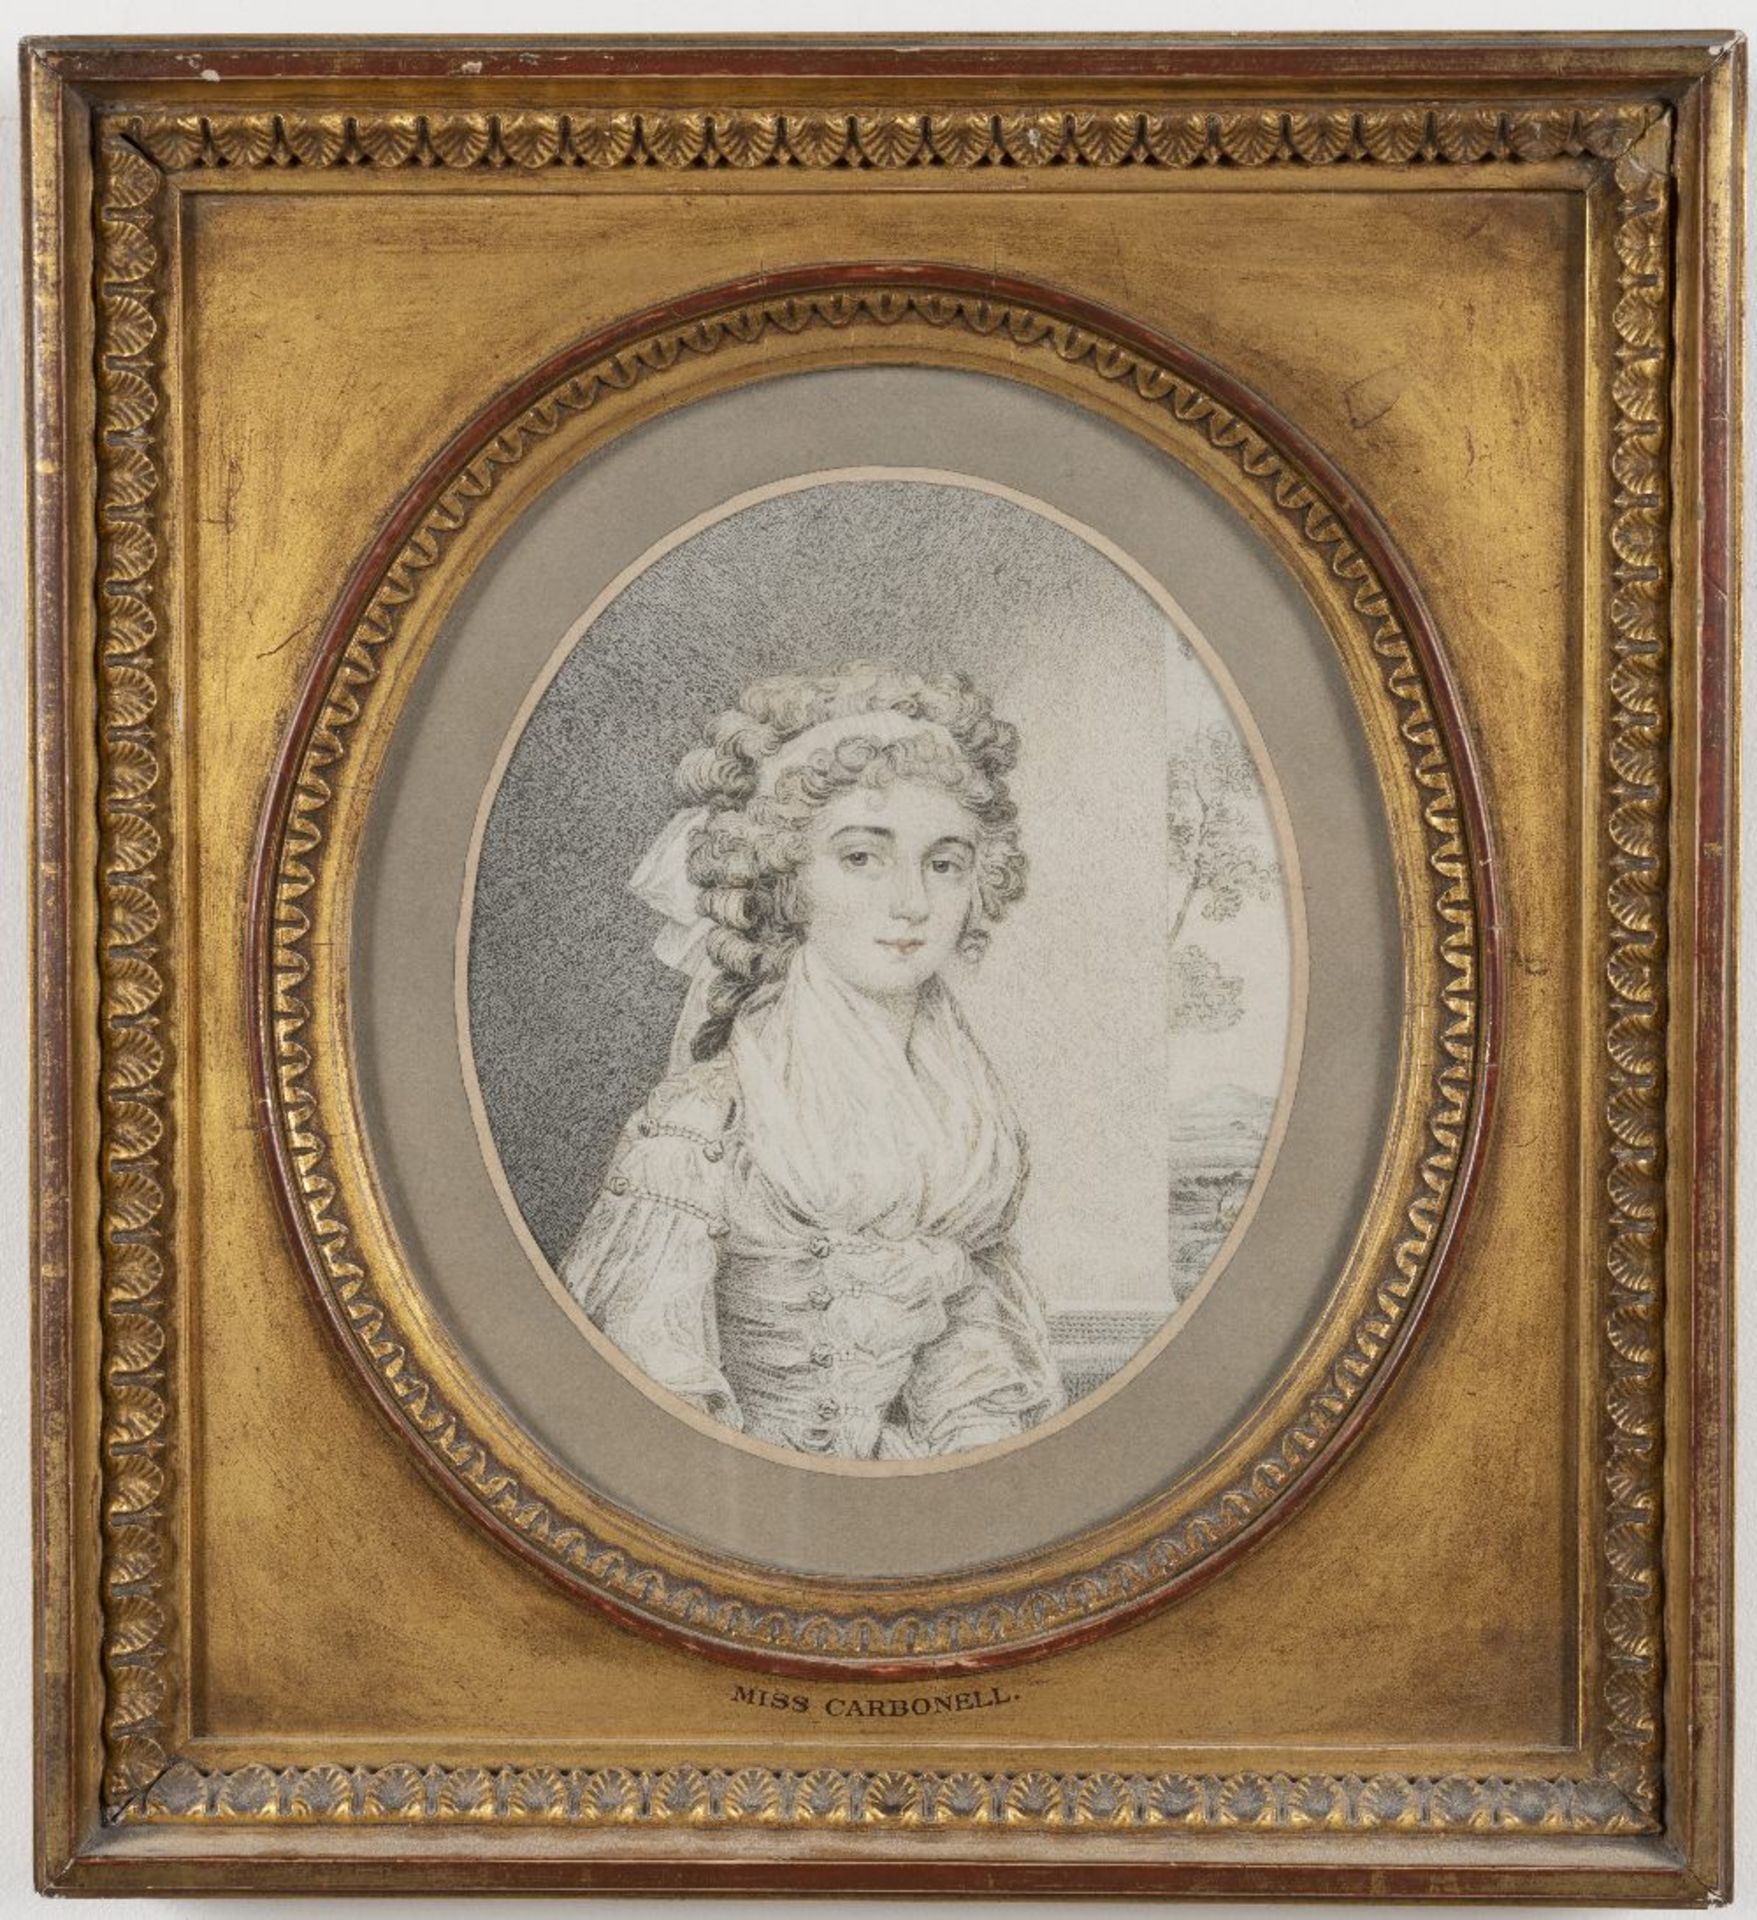 John Downman A.R.A (British, 1750-1824) Portraits of ladies (together with two 20th century Europ... - Image 2 of 6